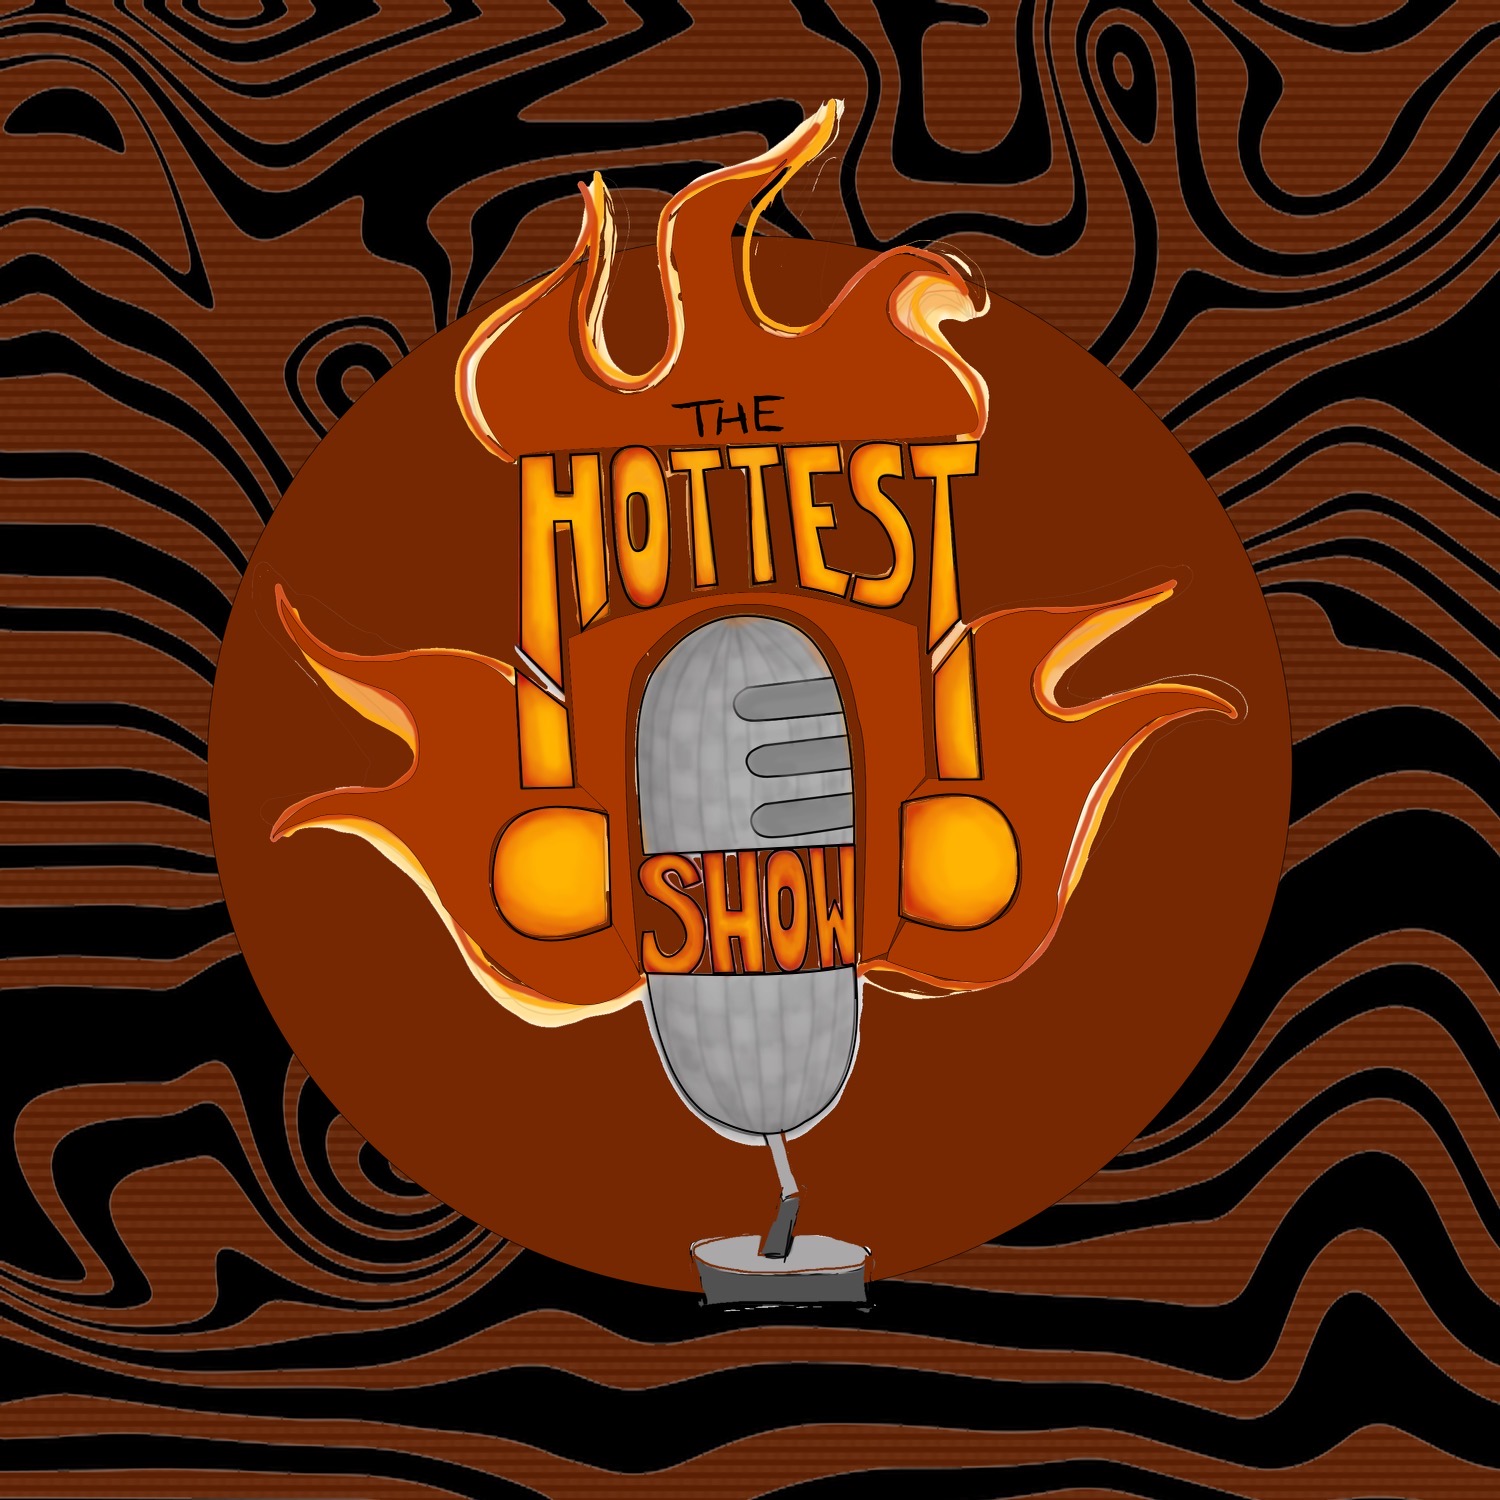 The Hottest Show